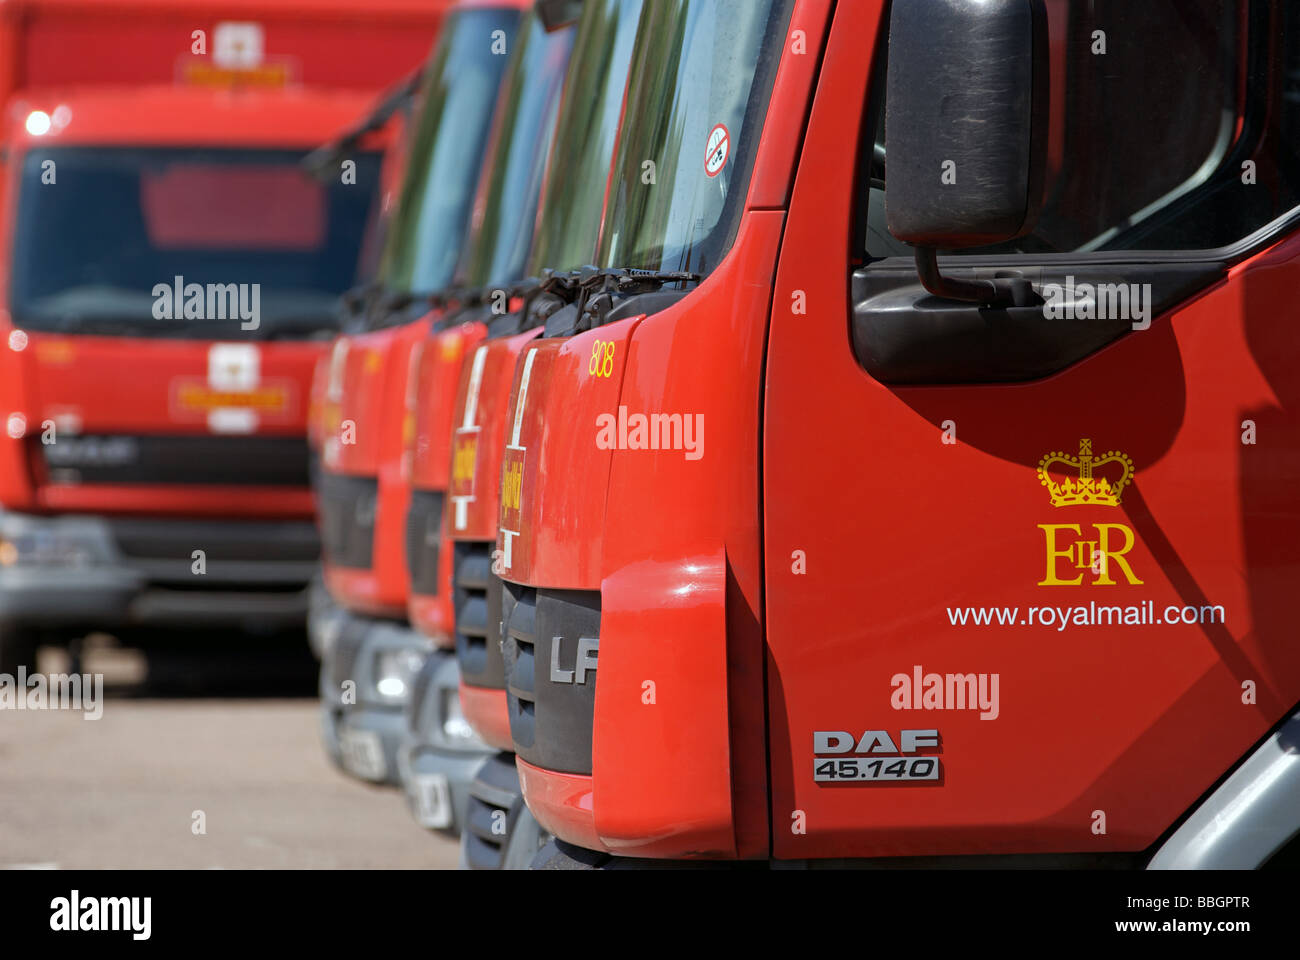 Royal Mail camion di consegna Foto Stock